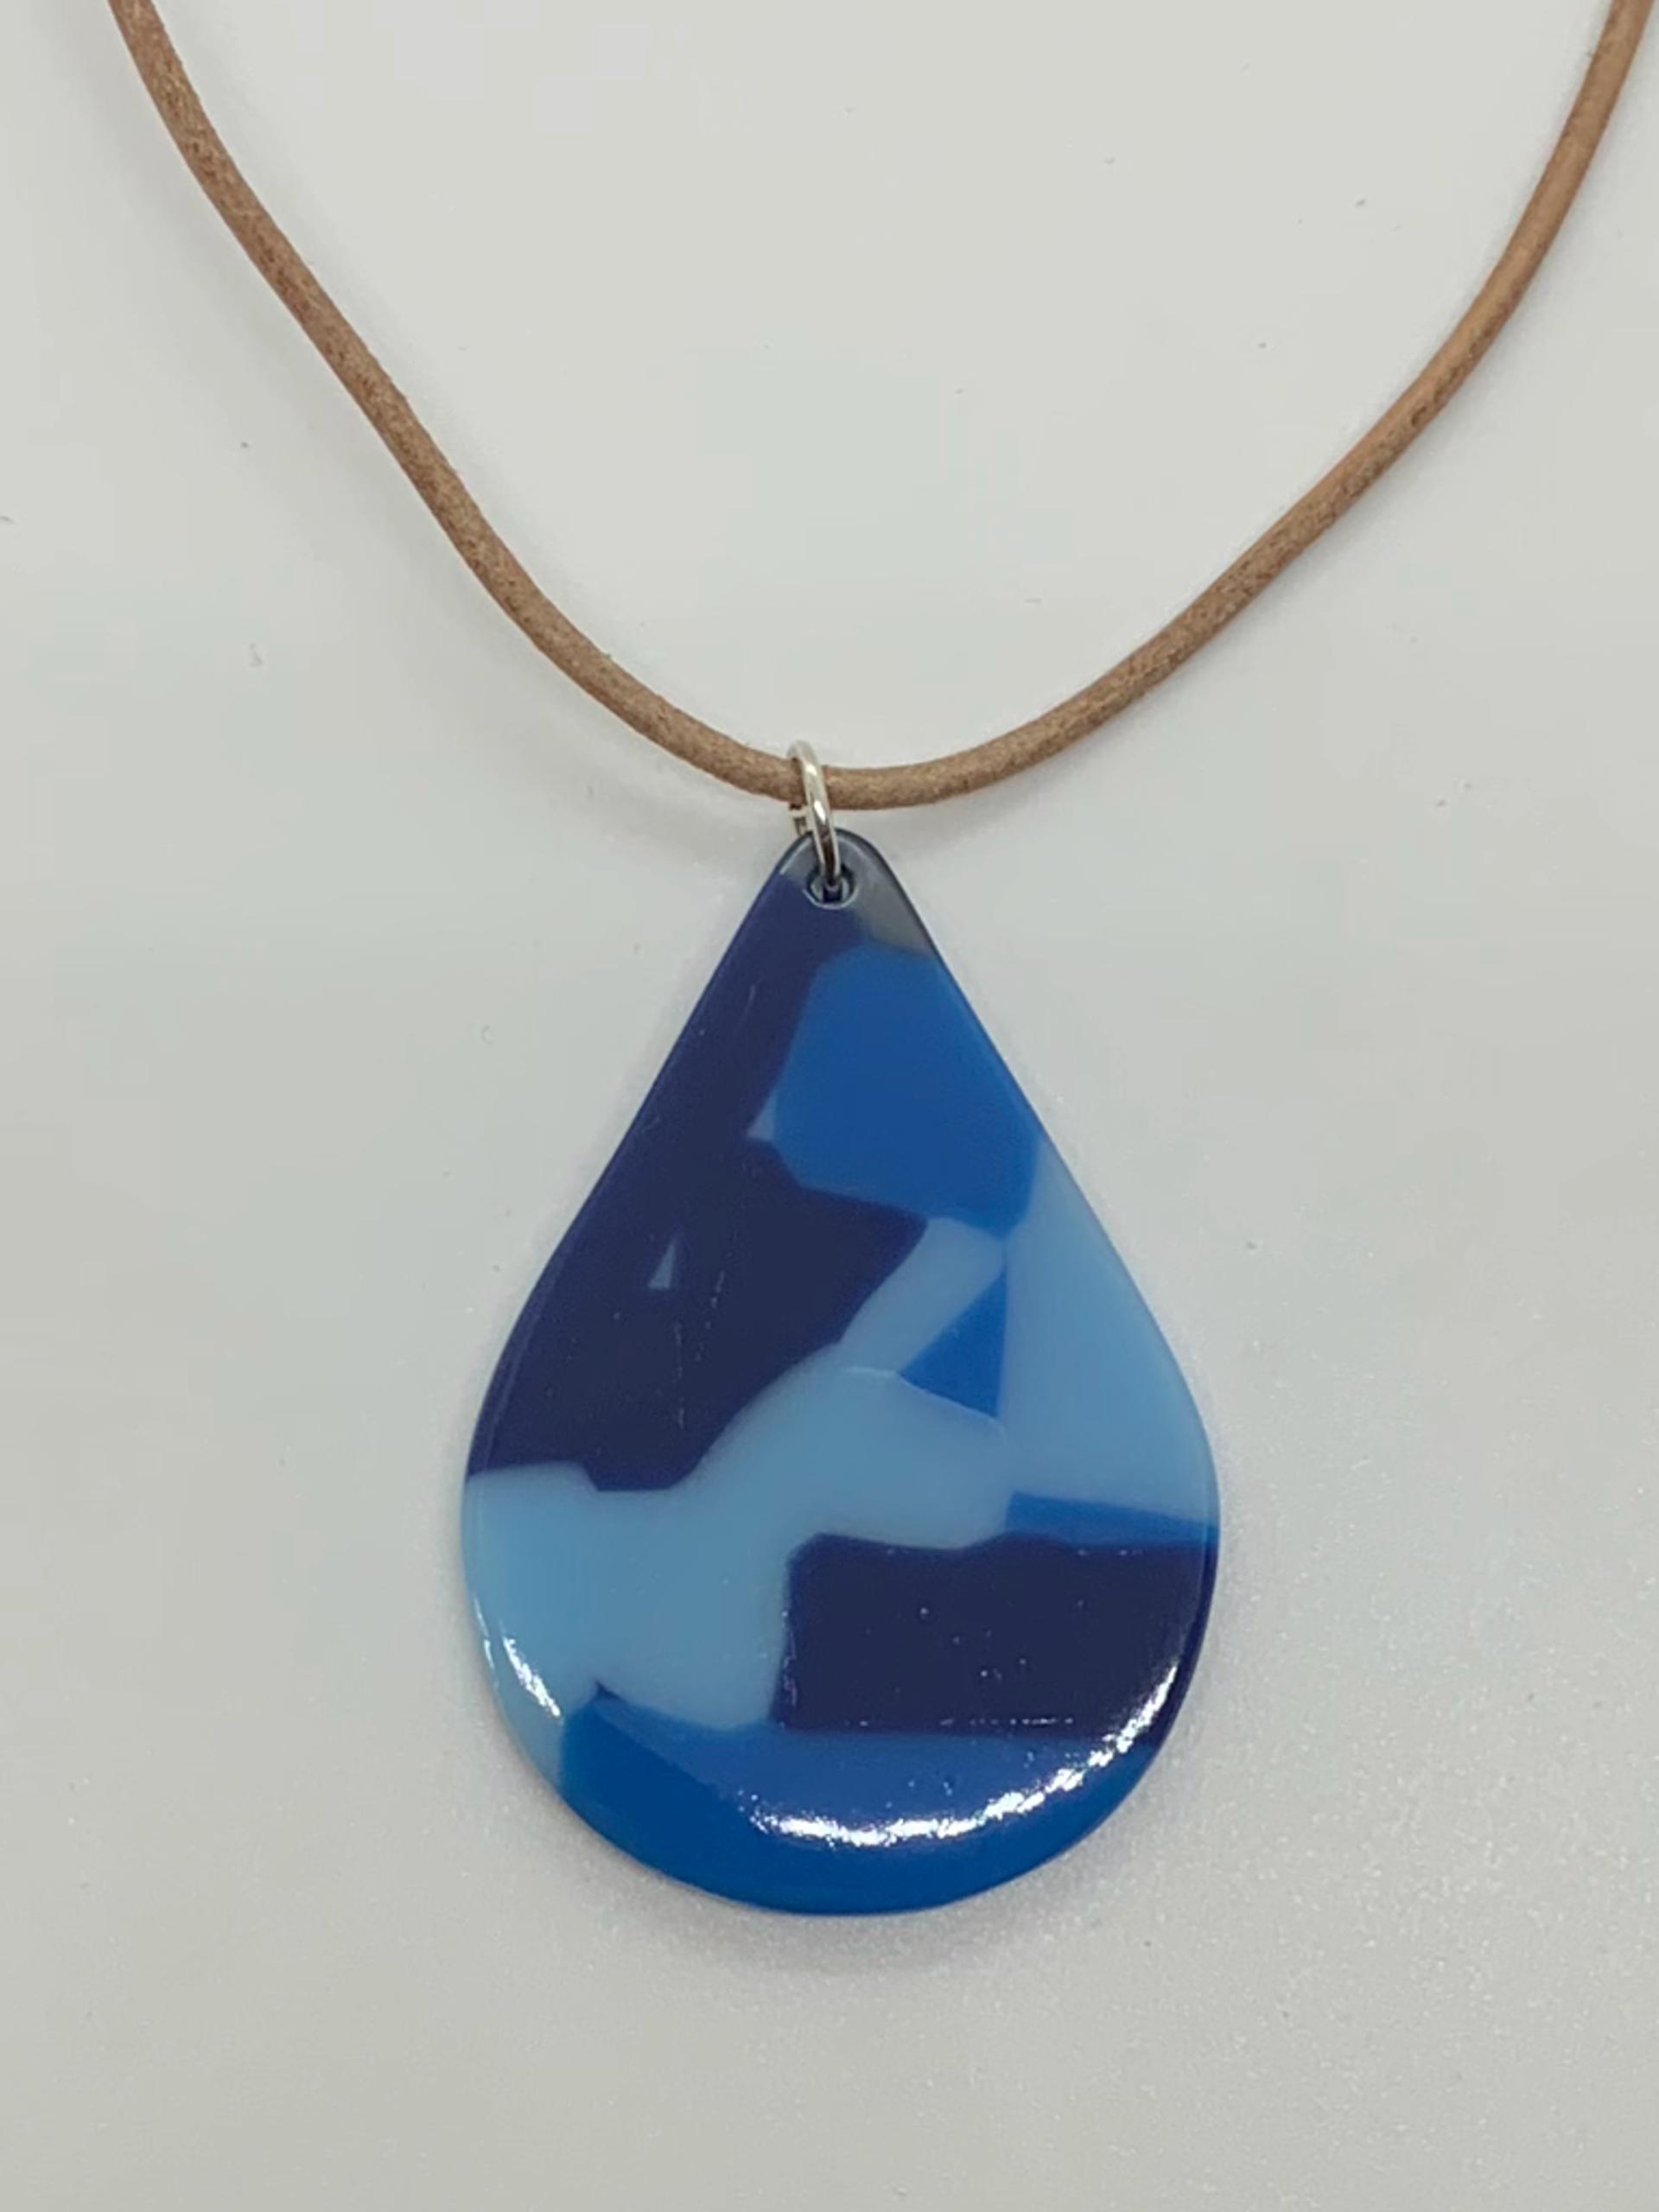 Molten Glossy Teardrop Necklace by Chris Cox